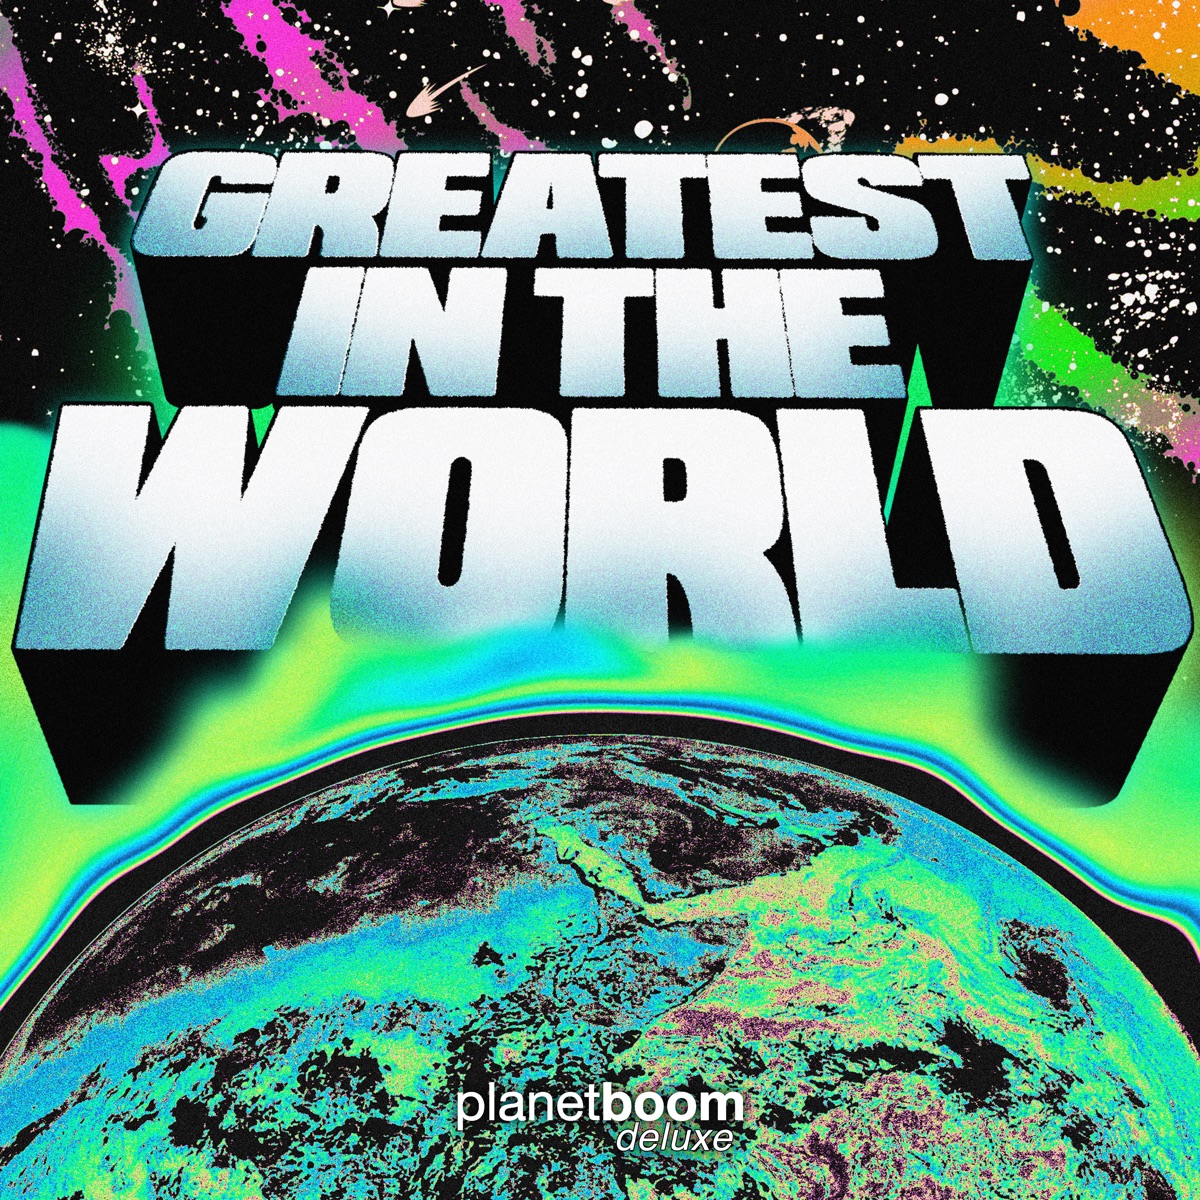 Planetboom - Greatest In The World - New Song 